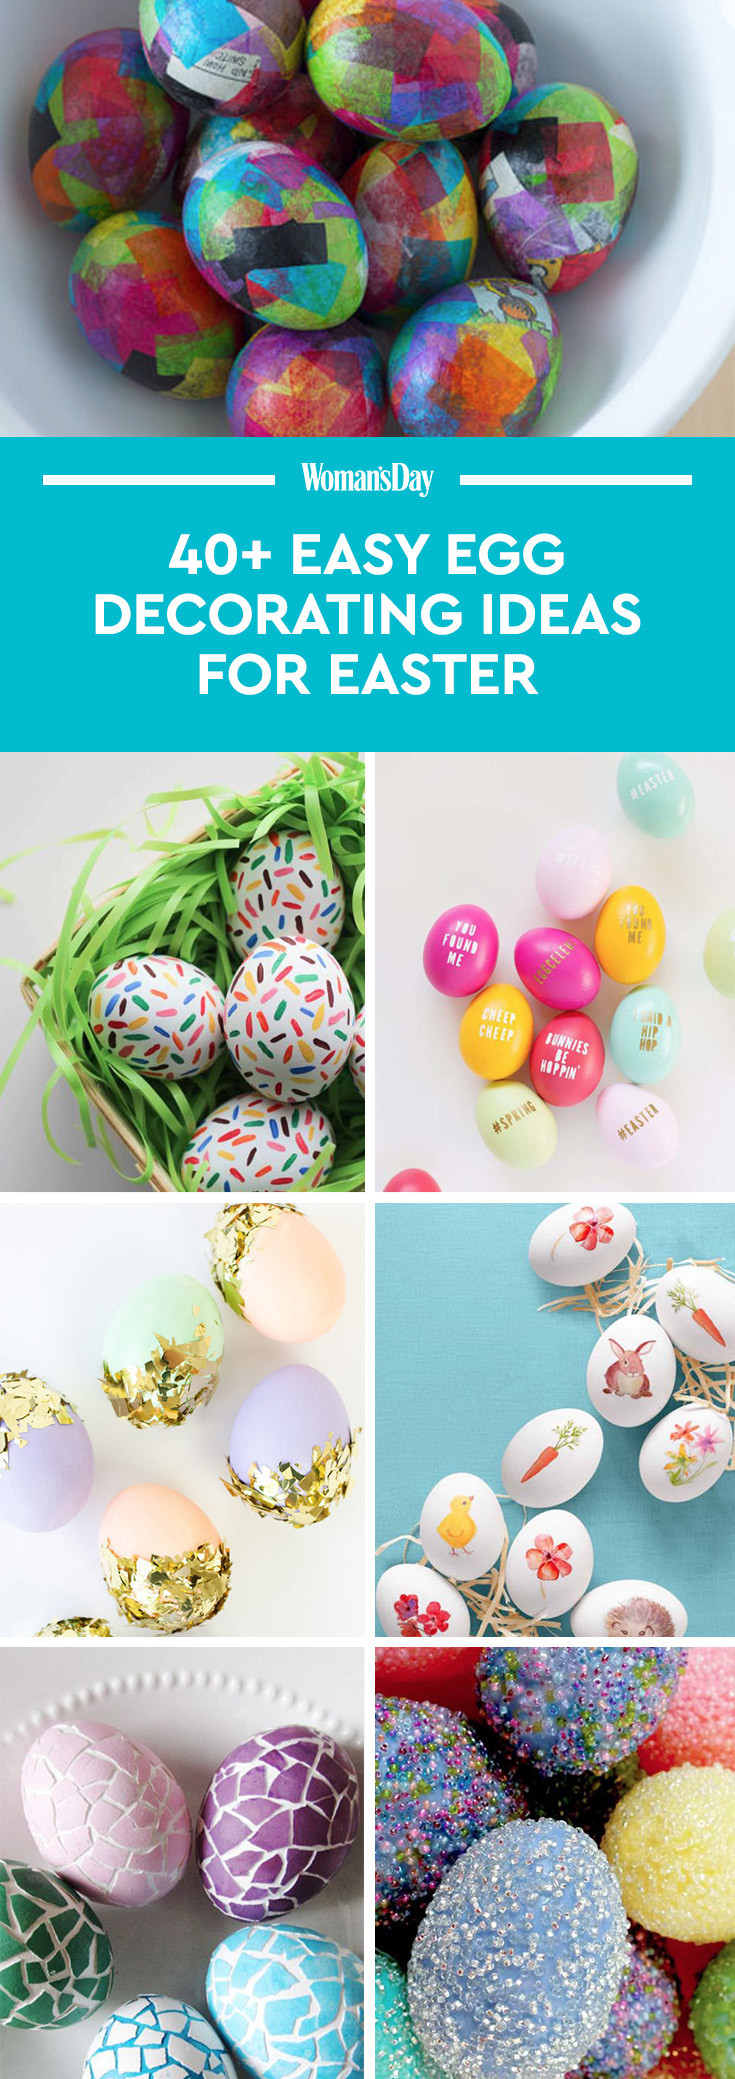 Easter Pics Ideas
 42 Cool Easter Egg Decorating Ideas Creative Designs for